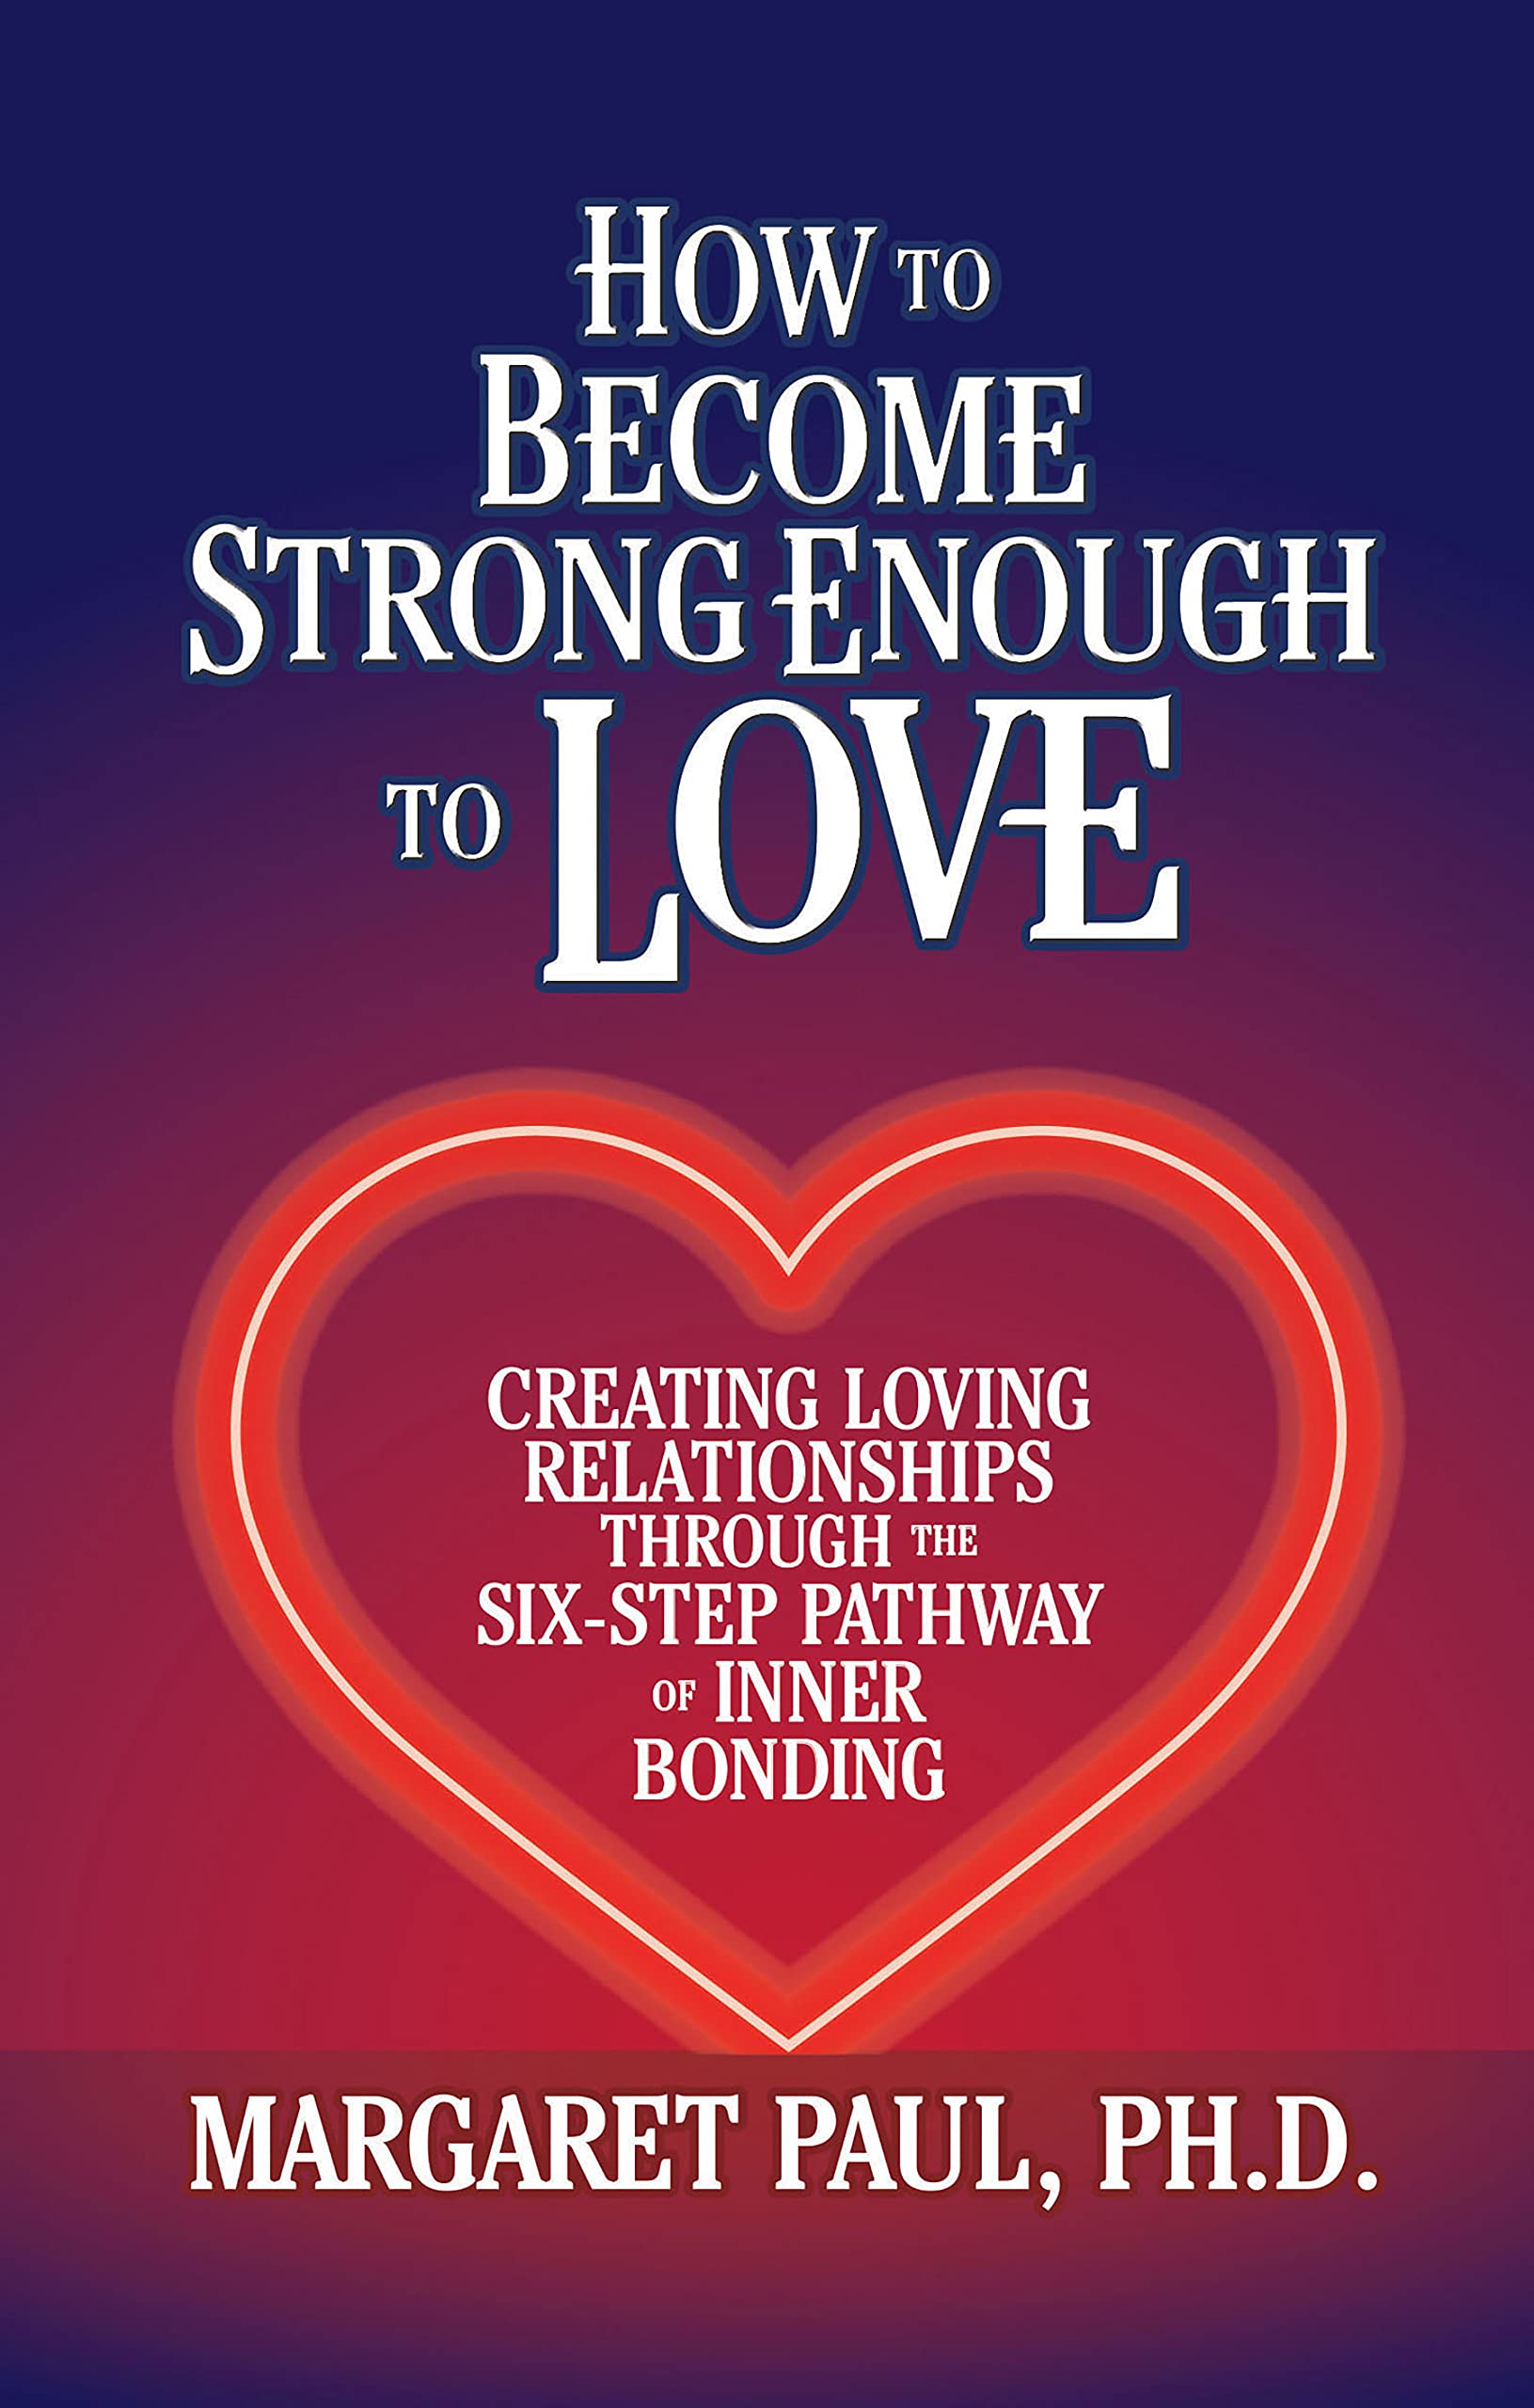 How to Become Strong Enough to Love - SureShot Books Publishing LLC